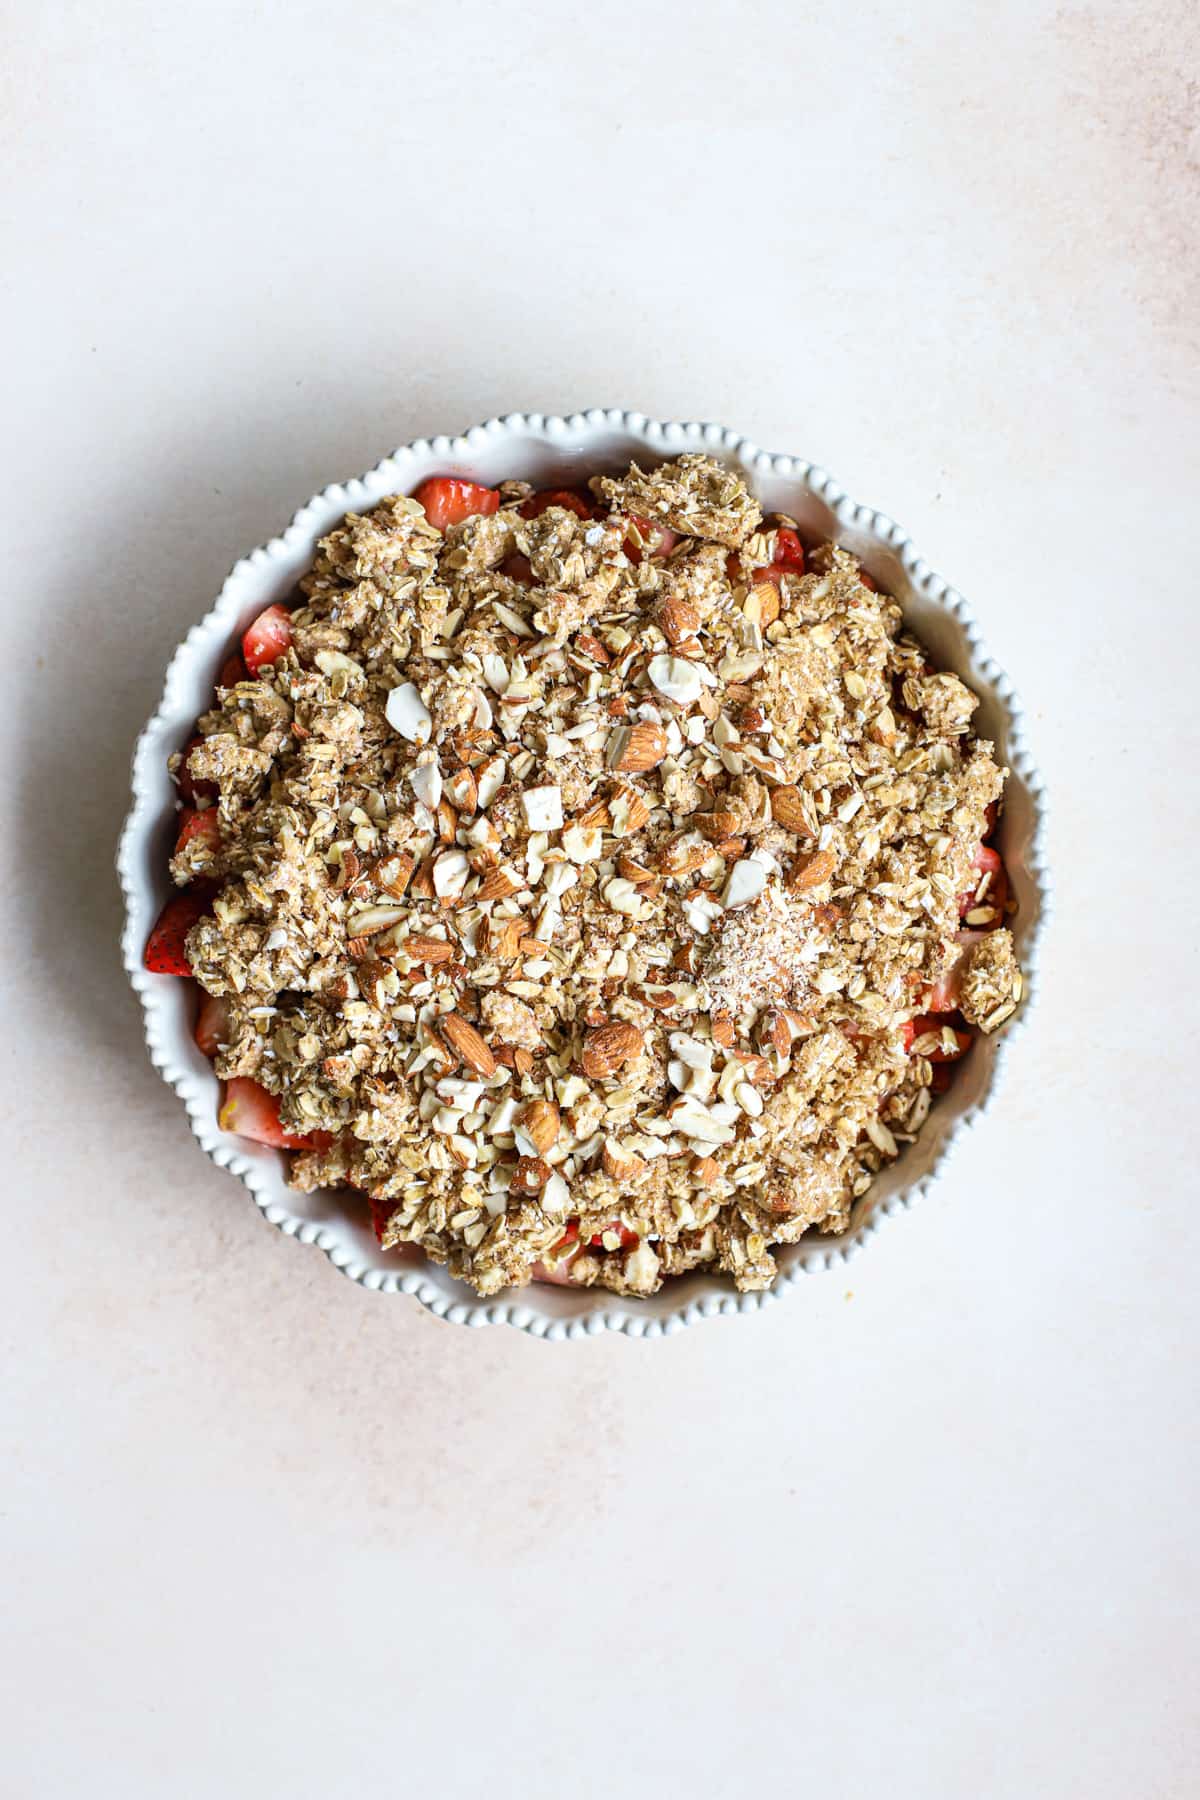 Prepared fresh strawberries in cream-colored pie dish, topped with crisp topping, before baking